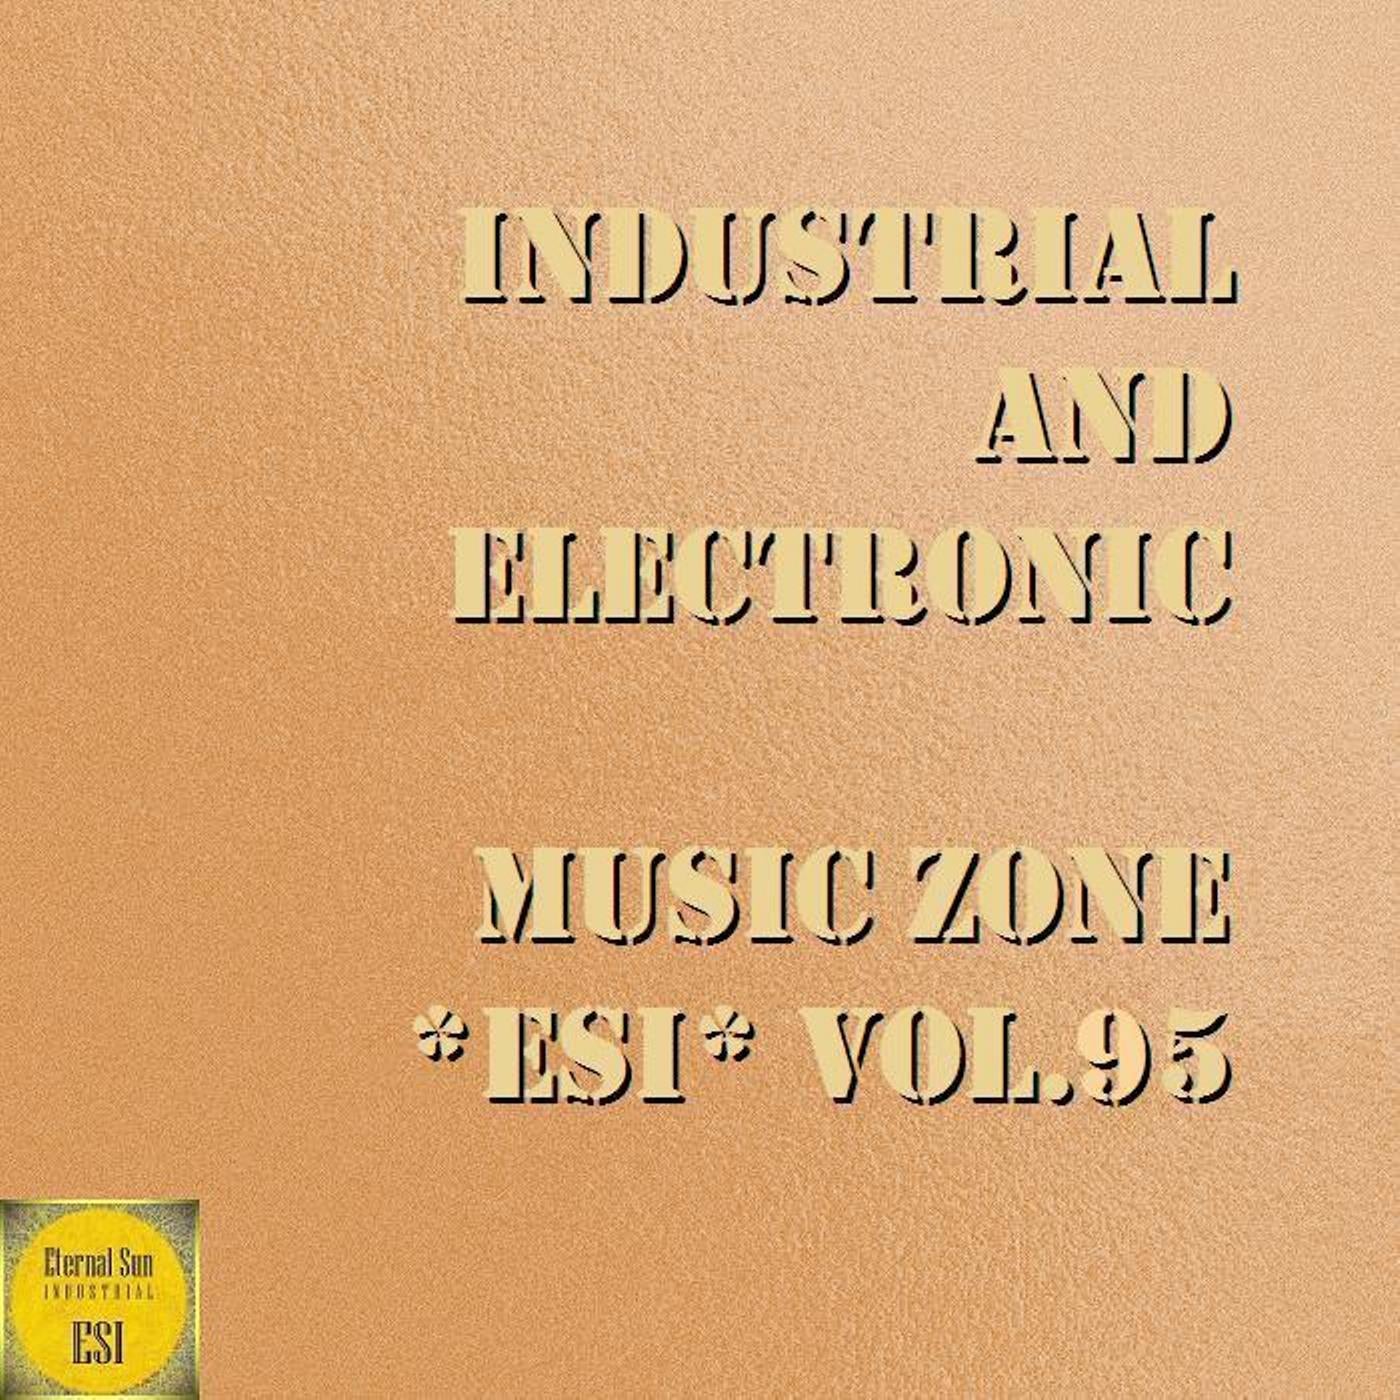 Industrial And Electronic - Music Zone ESI Vol. 95